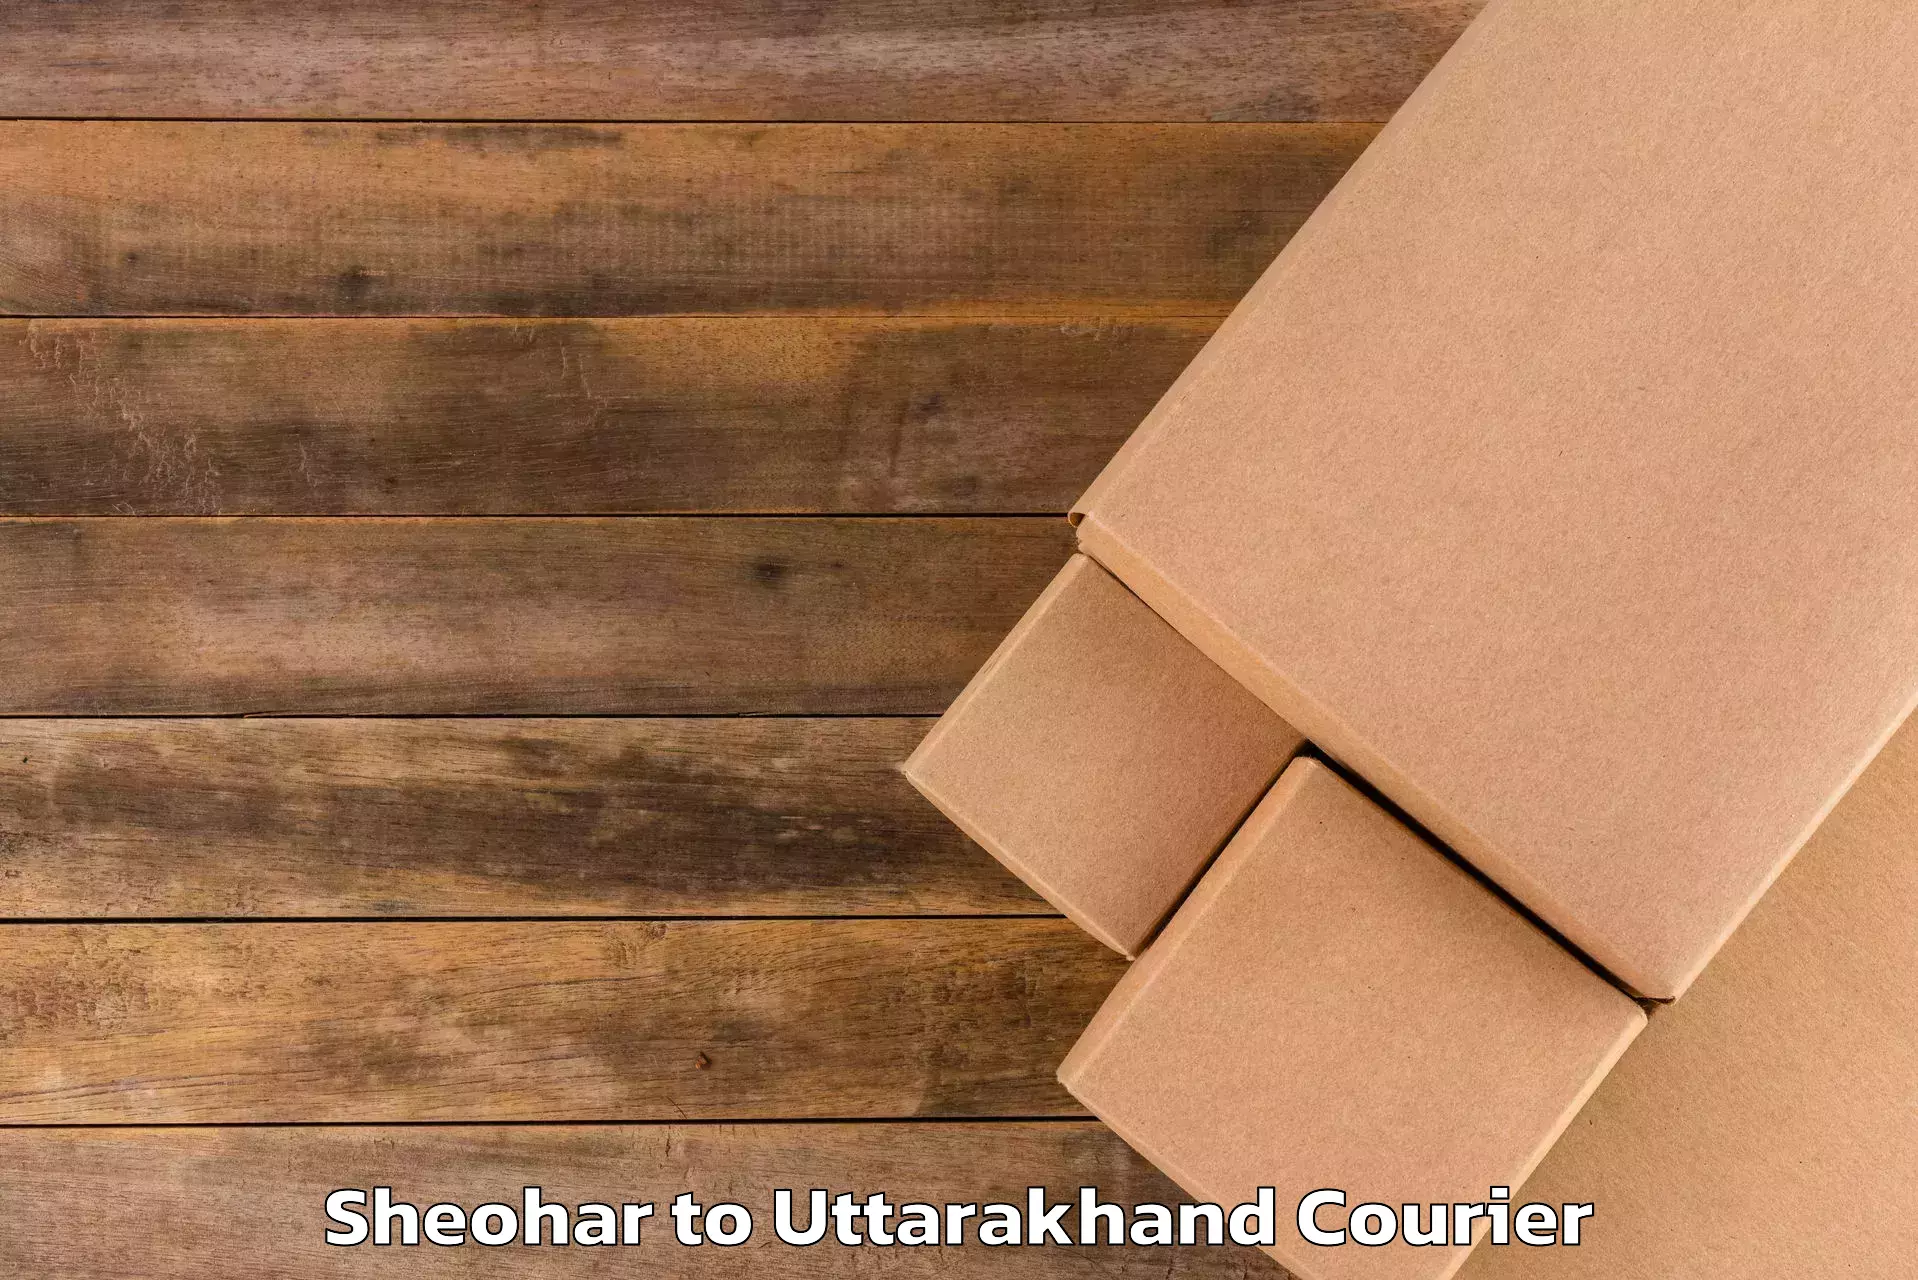 Instant baggage transport quote Sheohar to Tehri